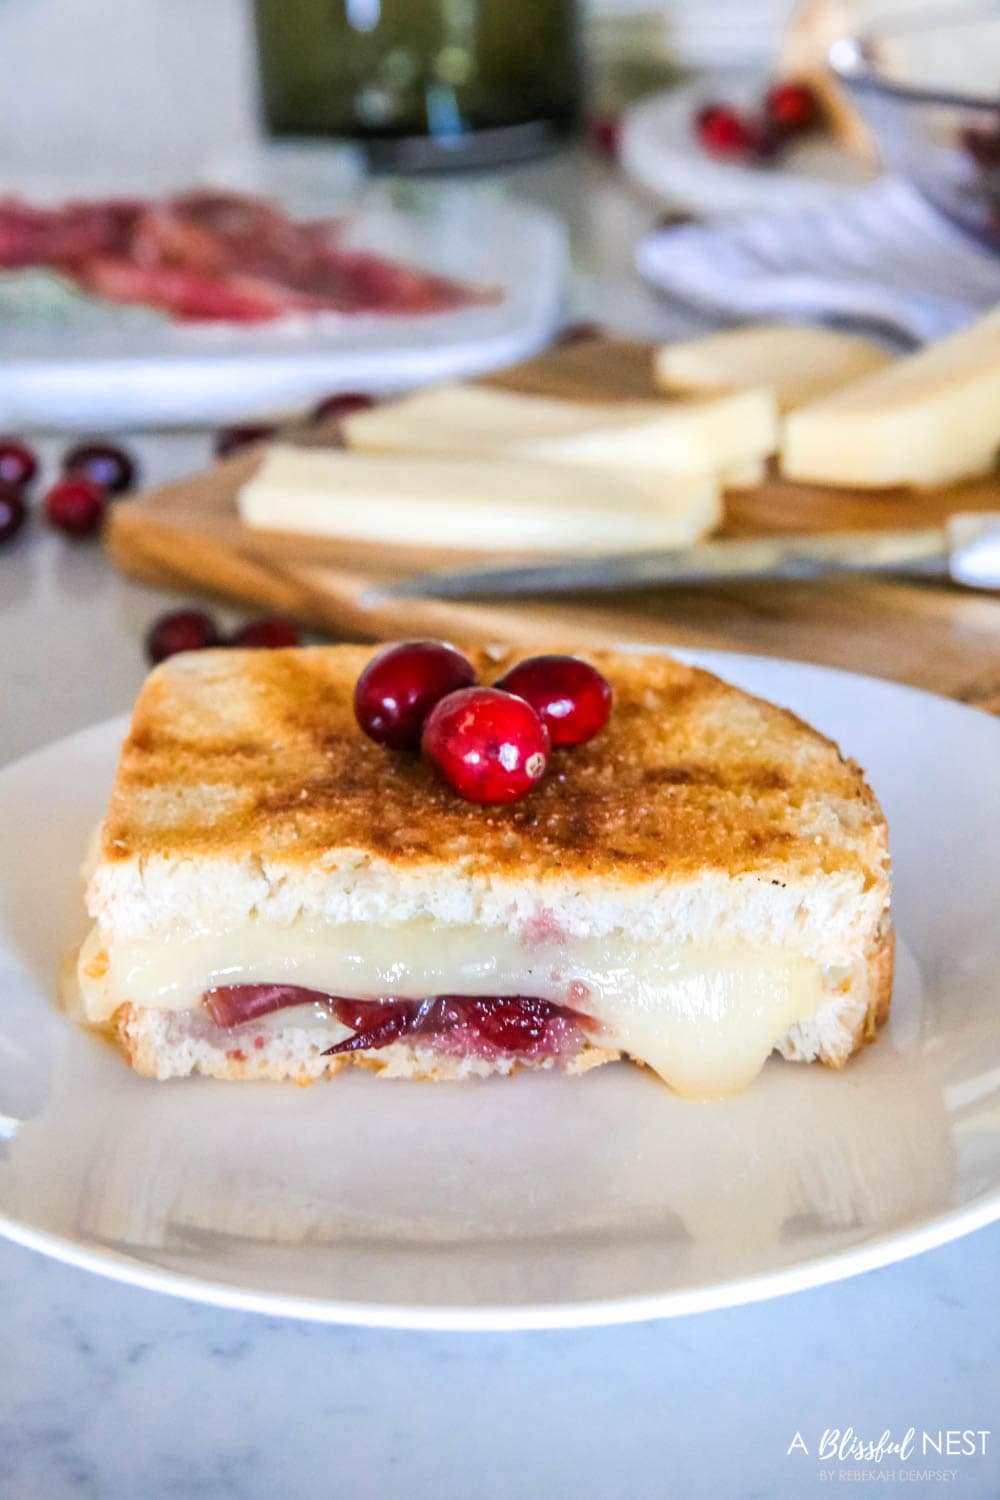 The yummiest grilled cheese recipe featuring my favorite cheese, Grand Cru by Roth Cheese. #ABlissfulNest #rothcheese #rothgrandcru #ad